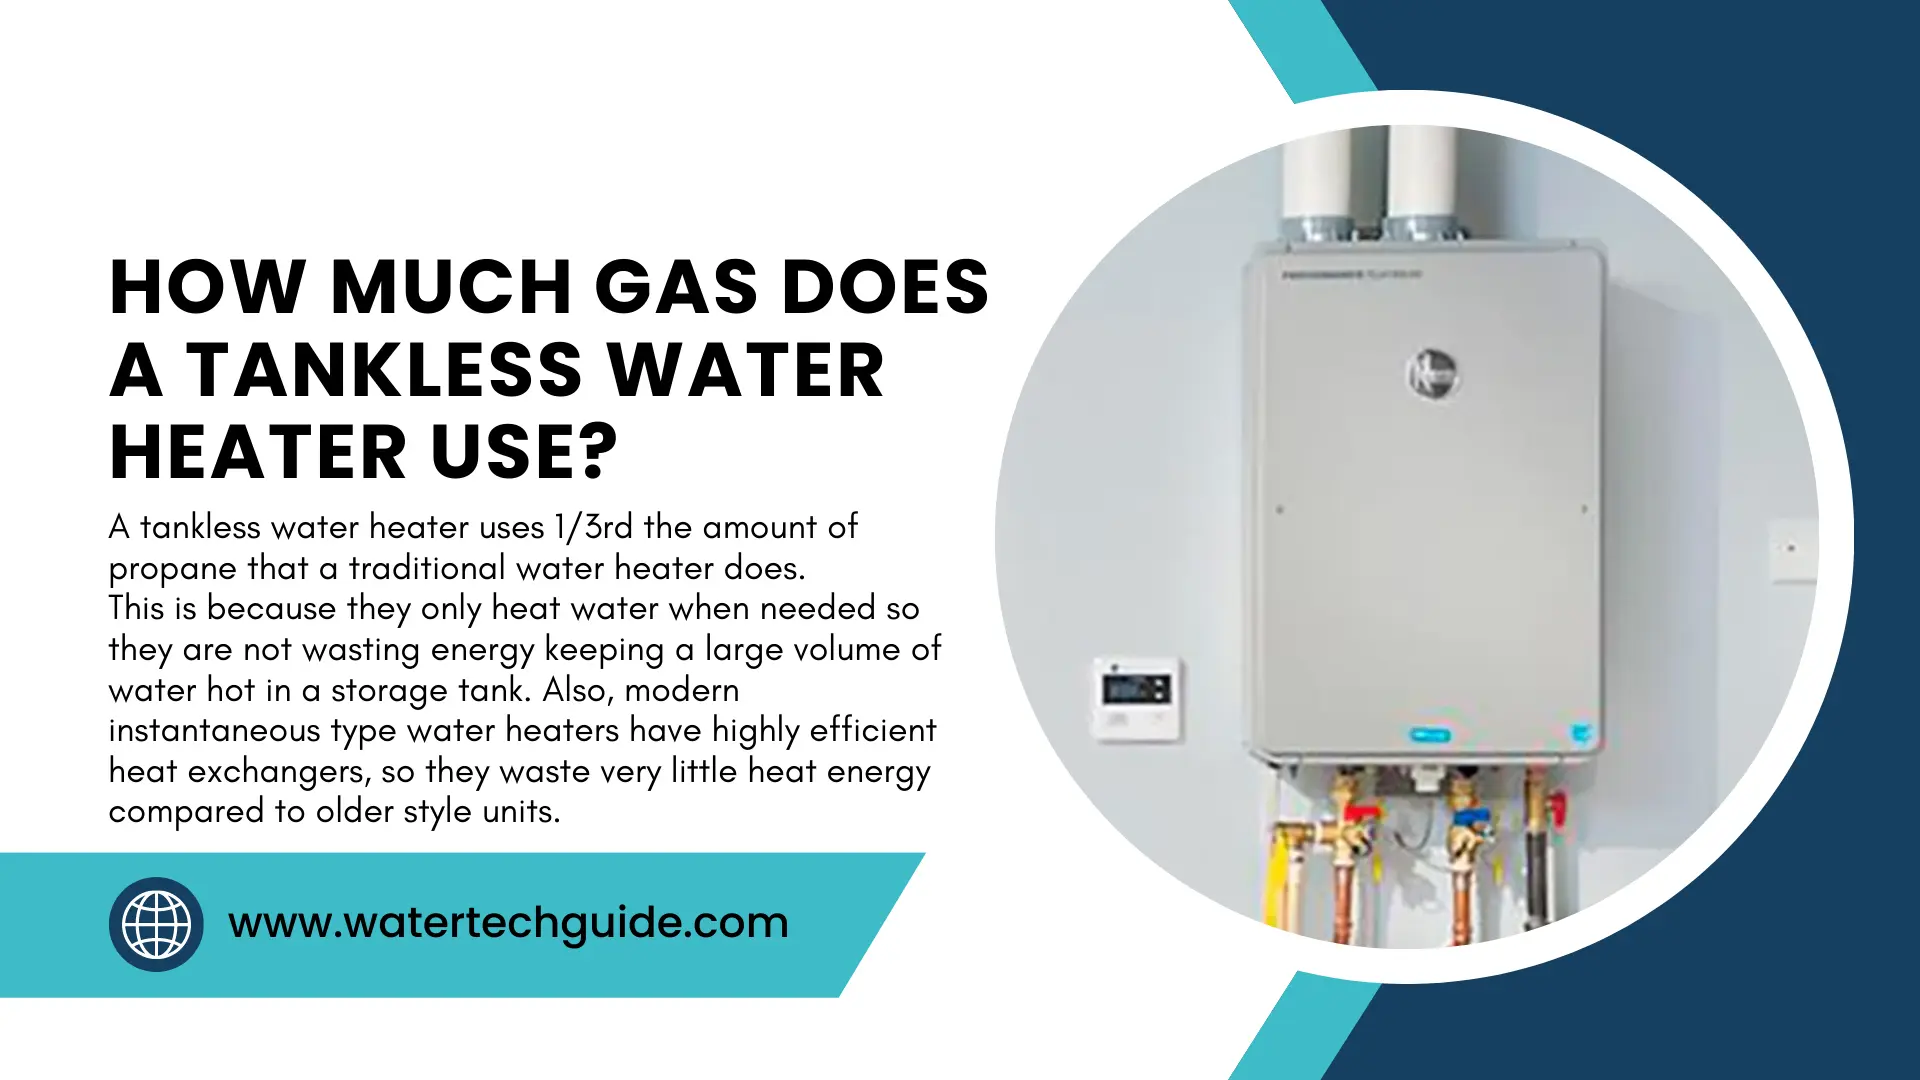 How Much Gas Does a Tankless Water Heater Use